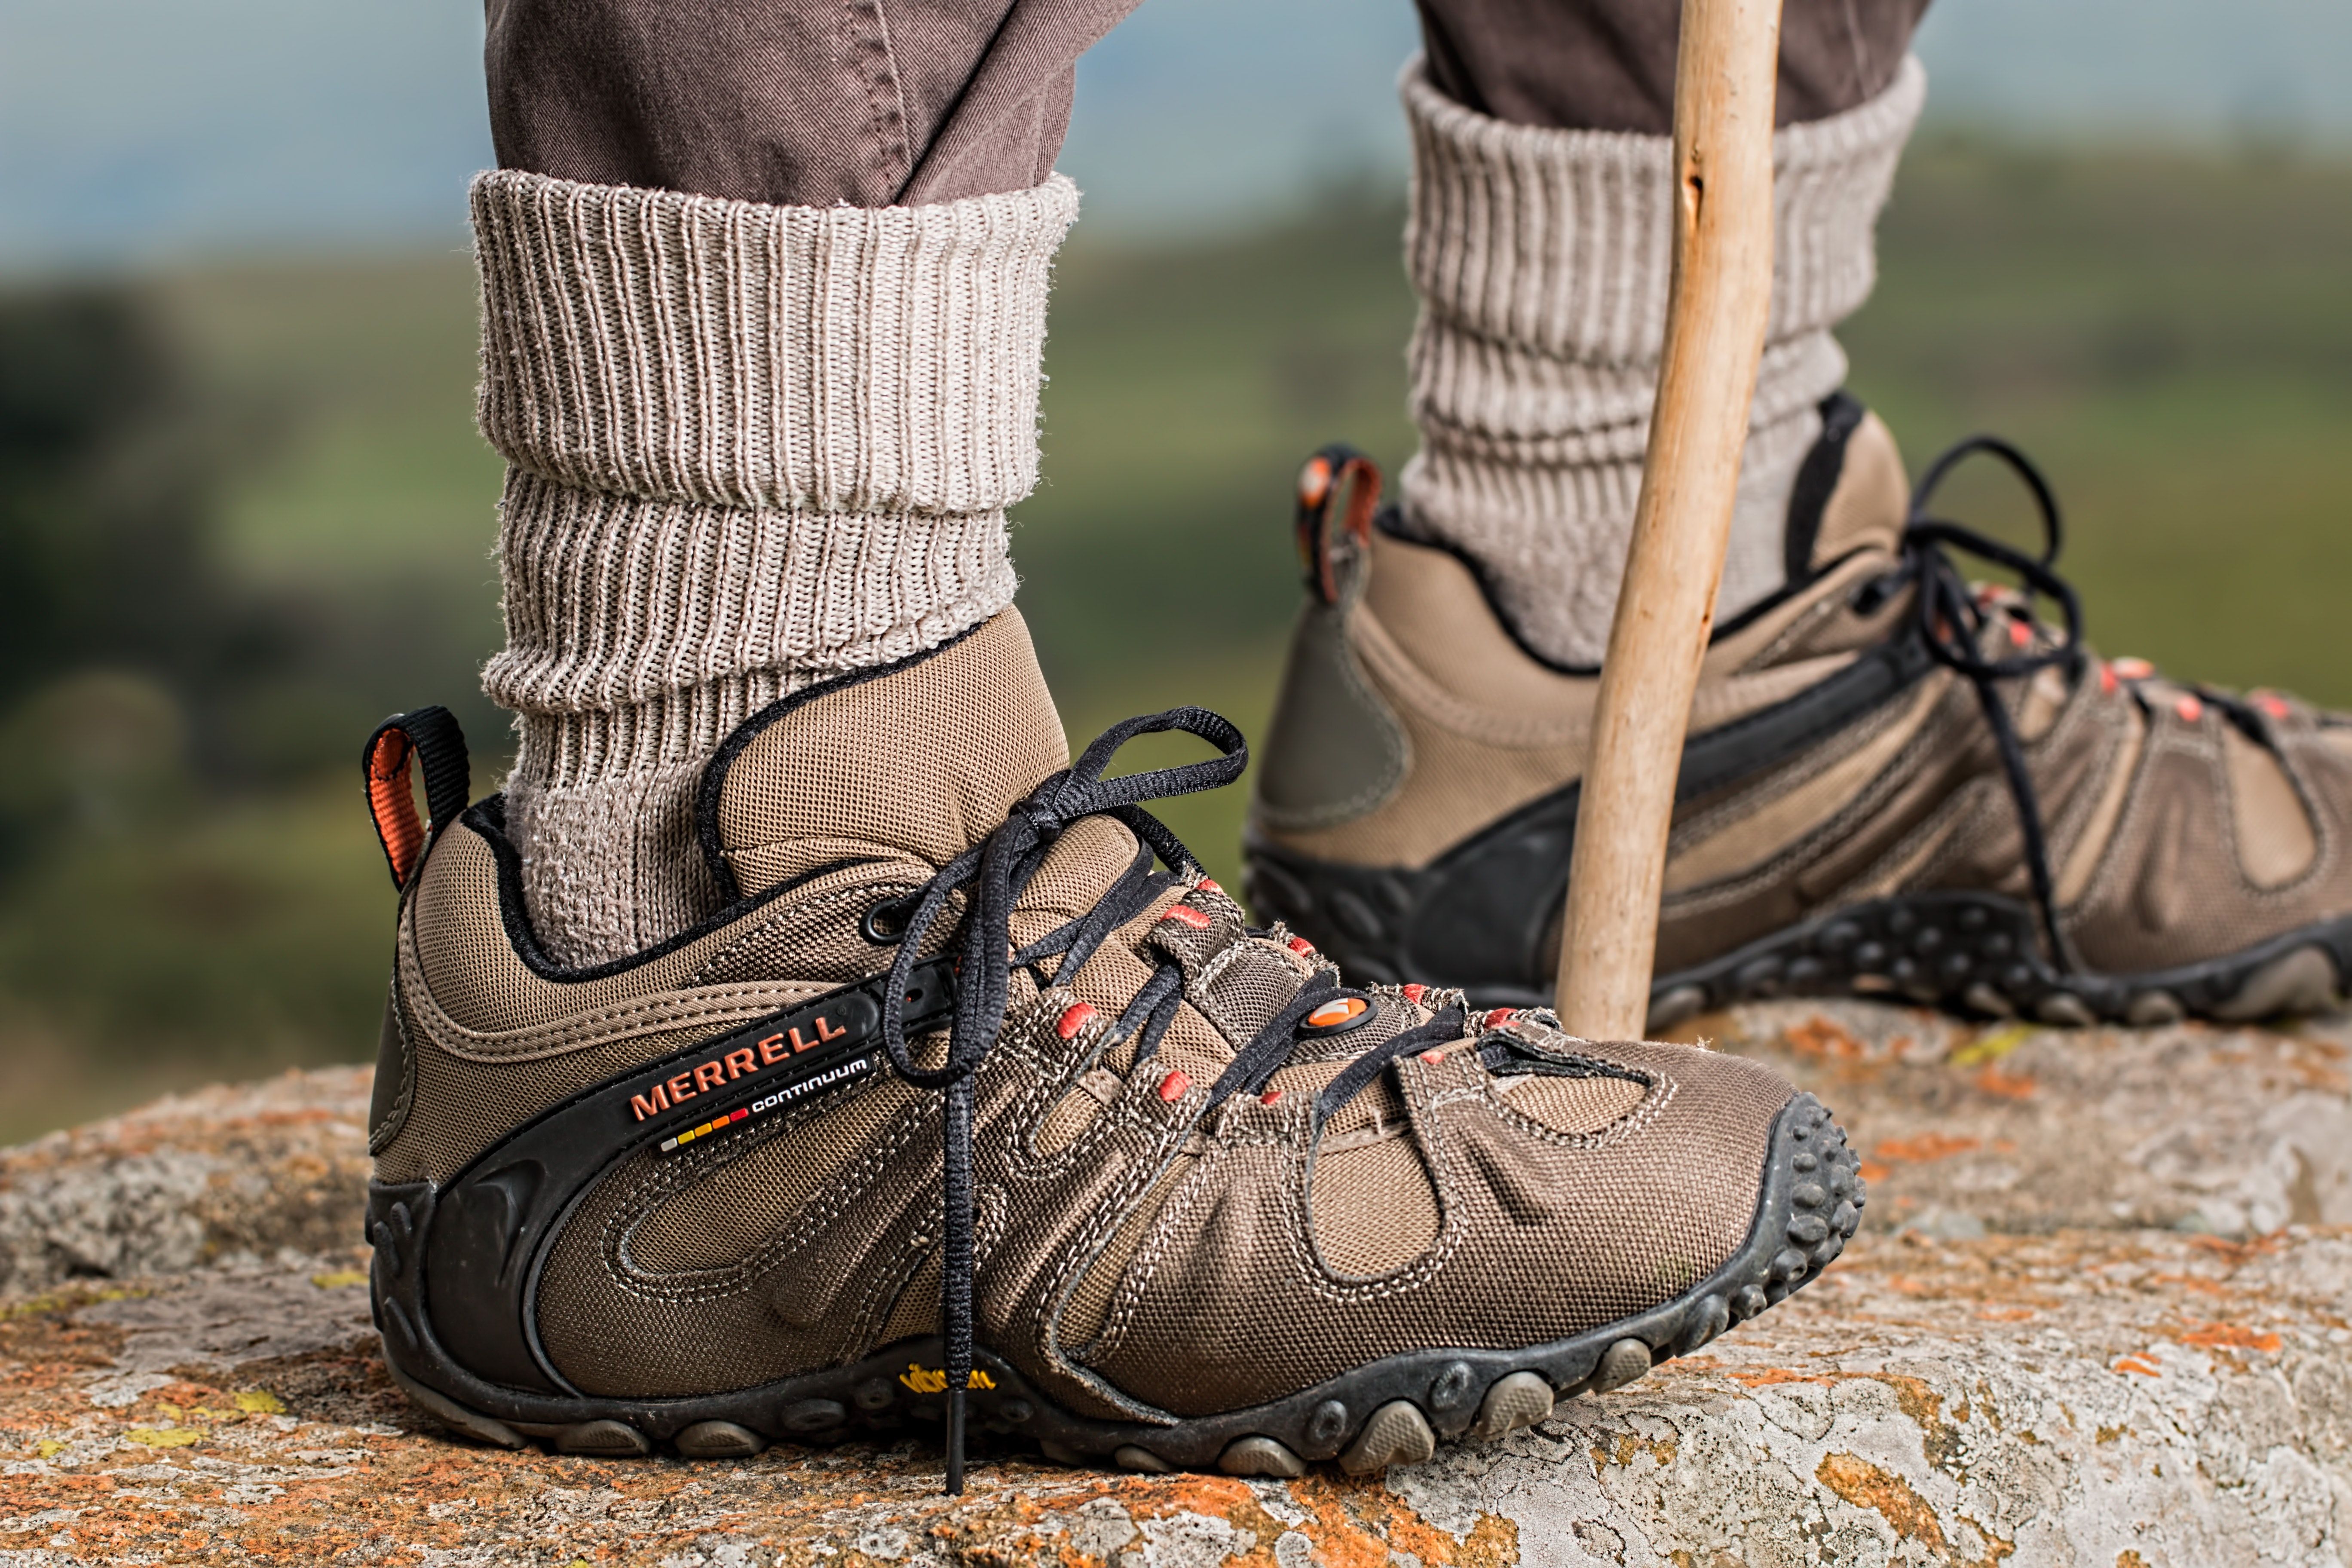 Men's Brown and Gray Merrell Hiking Shoes Holding Stick · Free